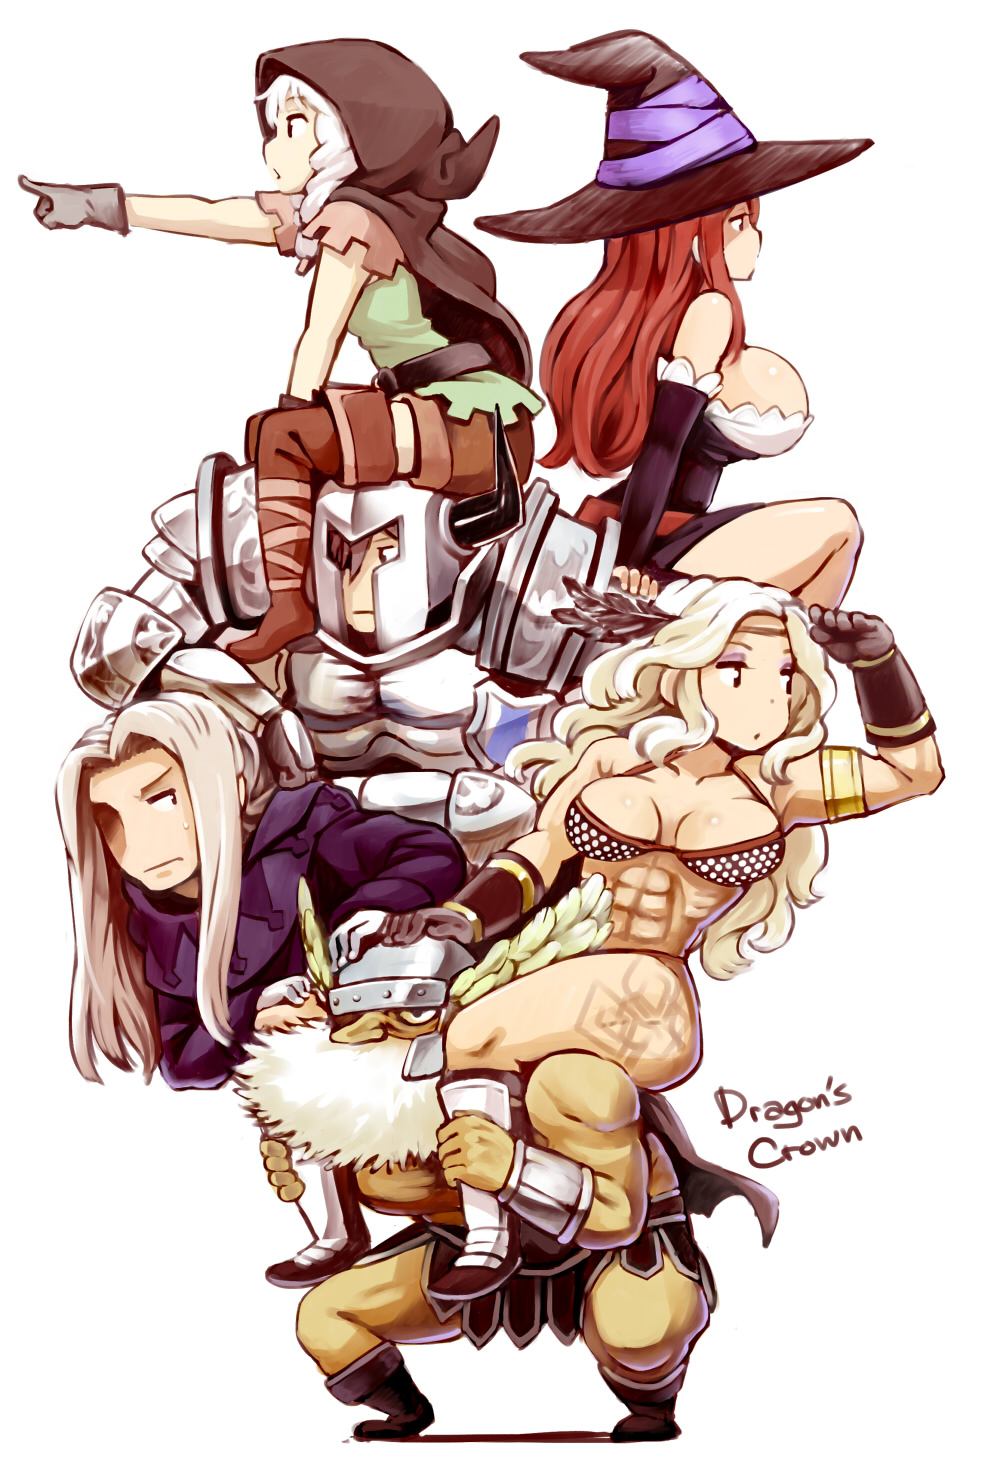 3boys 3girls amazon_(dragon's_crown) armor bare_shoulders beard blonde_hair boots braid breasts brown_eyes brown_hair cleavage detached_sleeves dragon's_crown dwarf_(dragon's_crown) elf elf_(dragon's_crown) facial_hair fighter_(dragon's_crown) gloves hair_over_one_eye hat helmet highres hood huge_breasts large_breasts long_hair multiple_boys multiple_girls muscle nagian open_mouth piggyback pointing pointy_ears shorts sorceress_(dragon's_crown) sweatdrop thigh-highs thigh_boots twin_braids white_hair winged_helmet witch_hat wizard_(dragon's_crown)